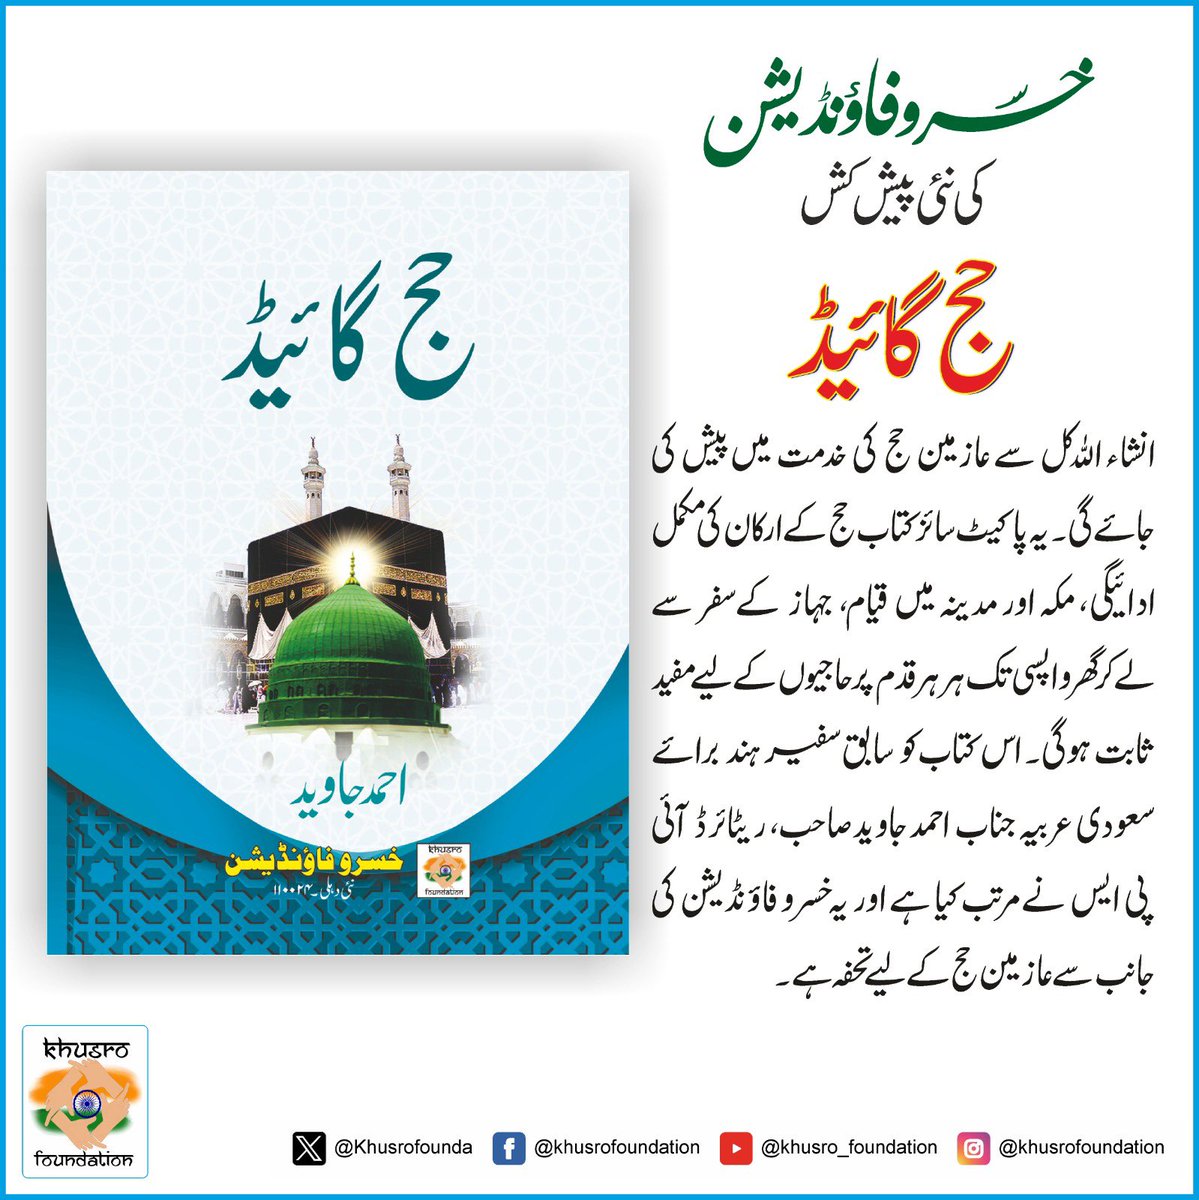 Khusro Foundation launches Hajj Guide for the pilgrimage to Mecca. This pocket-sized booklet guides you in your blessed journey.
#Urdu #books #guide #hajj #Mecca #Islam #peace 

@jamia_hamdard @AIMPLB_Official @JamiatUlama_in @aiumbofficial @MunsifTVIndia @Darululoom077